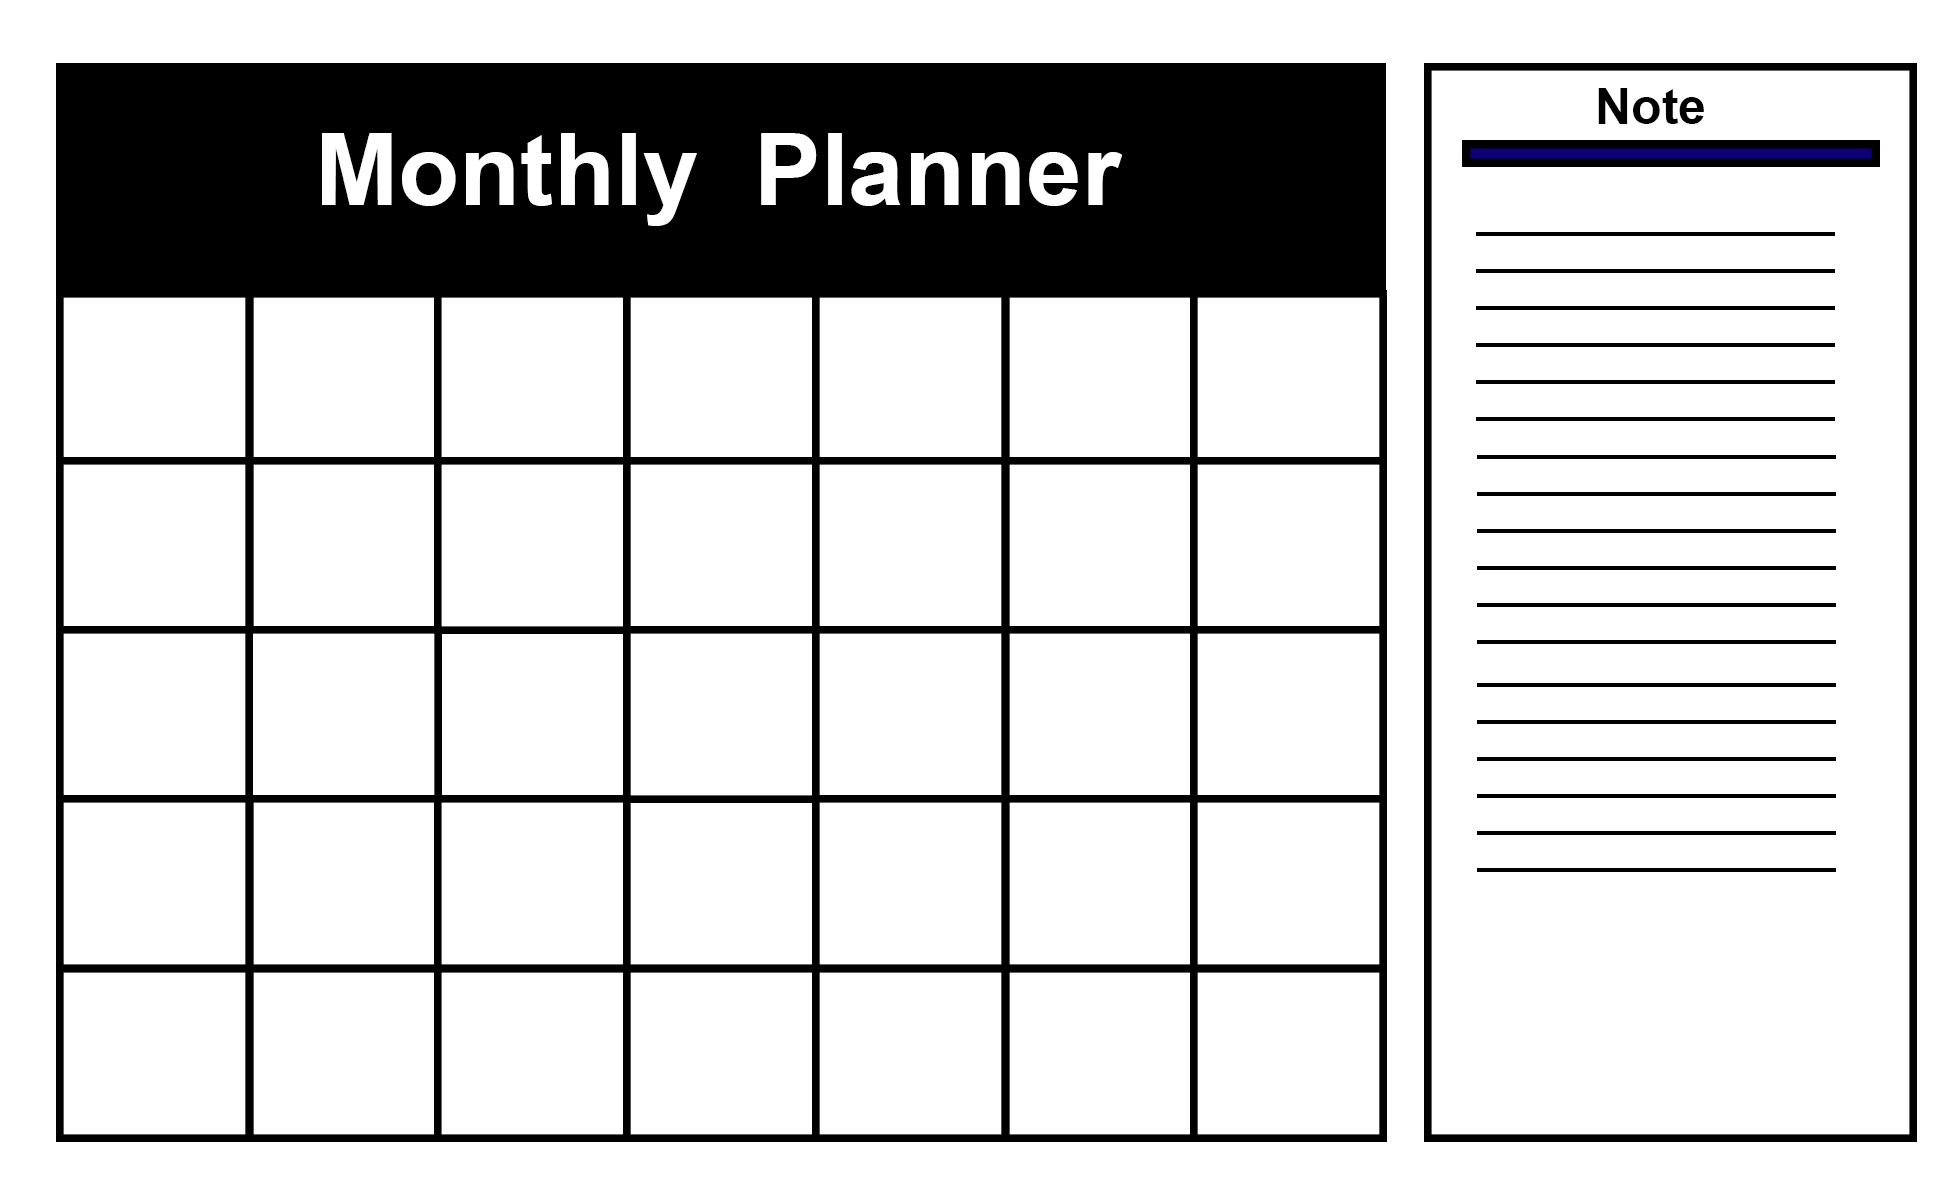 Monthly Planner Template Excel Free Download